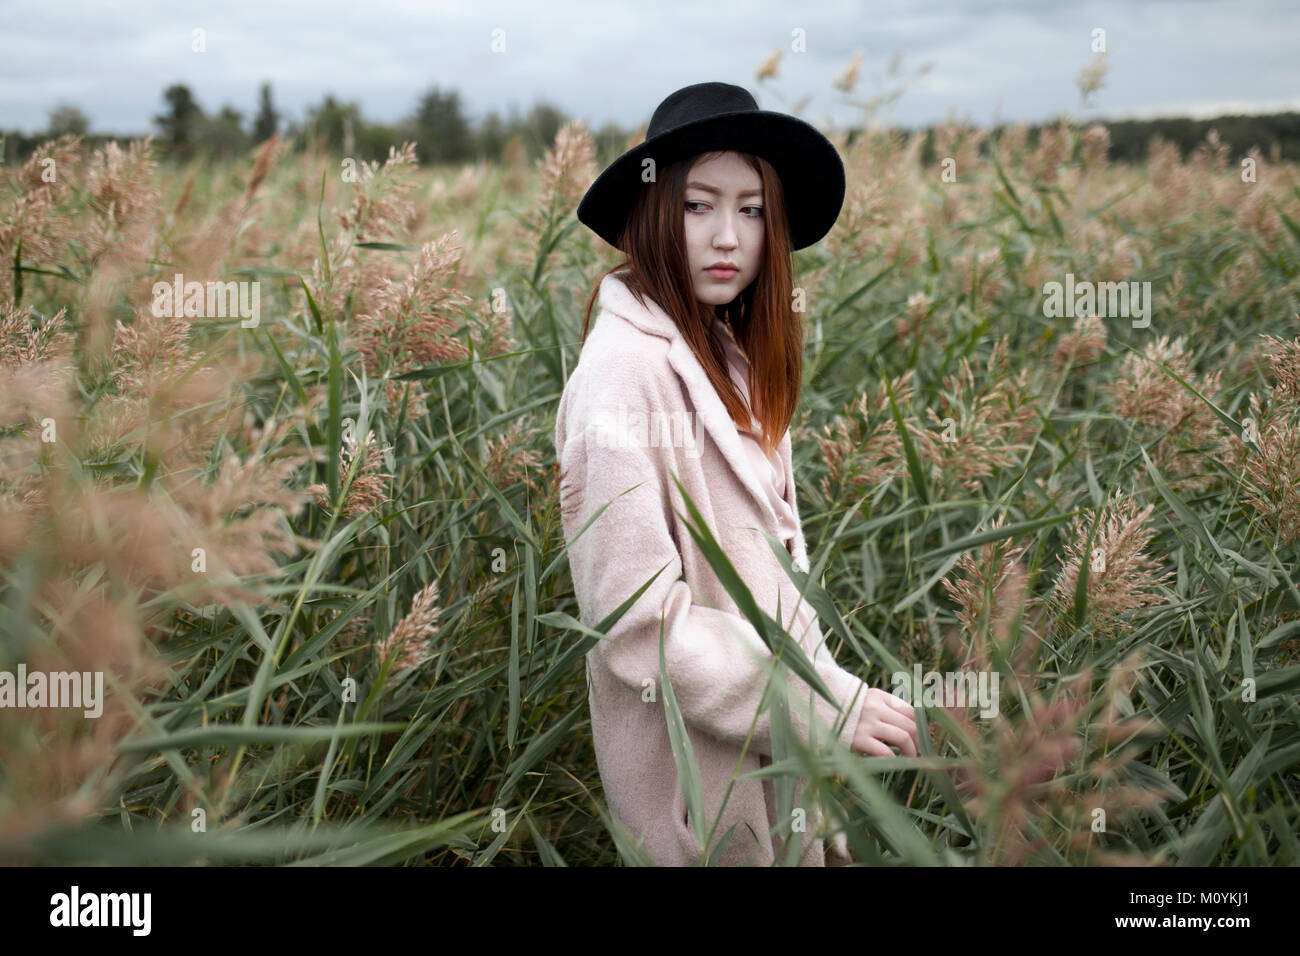 Asian woman standing in field Stock Photo